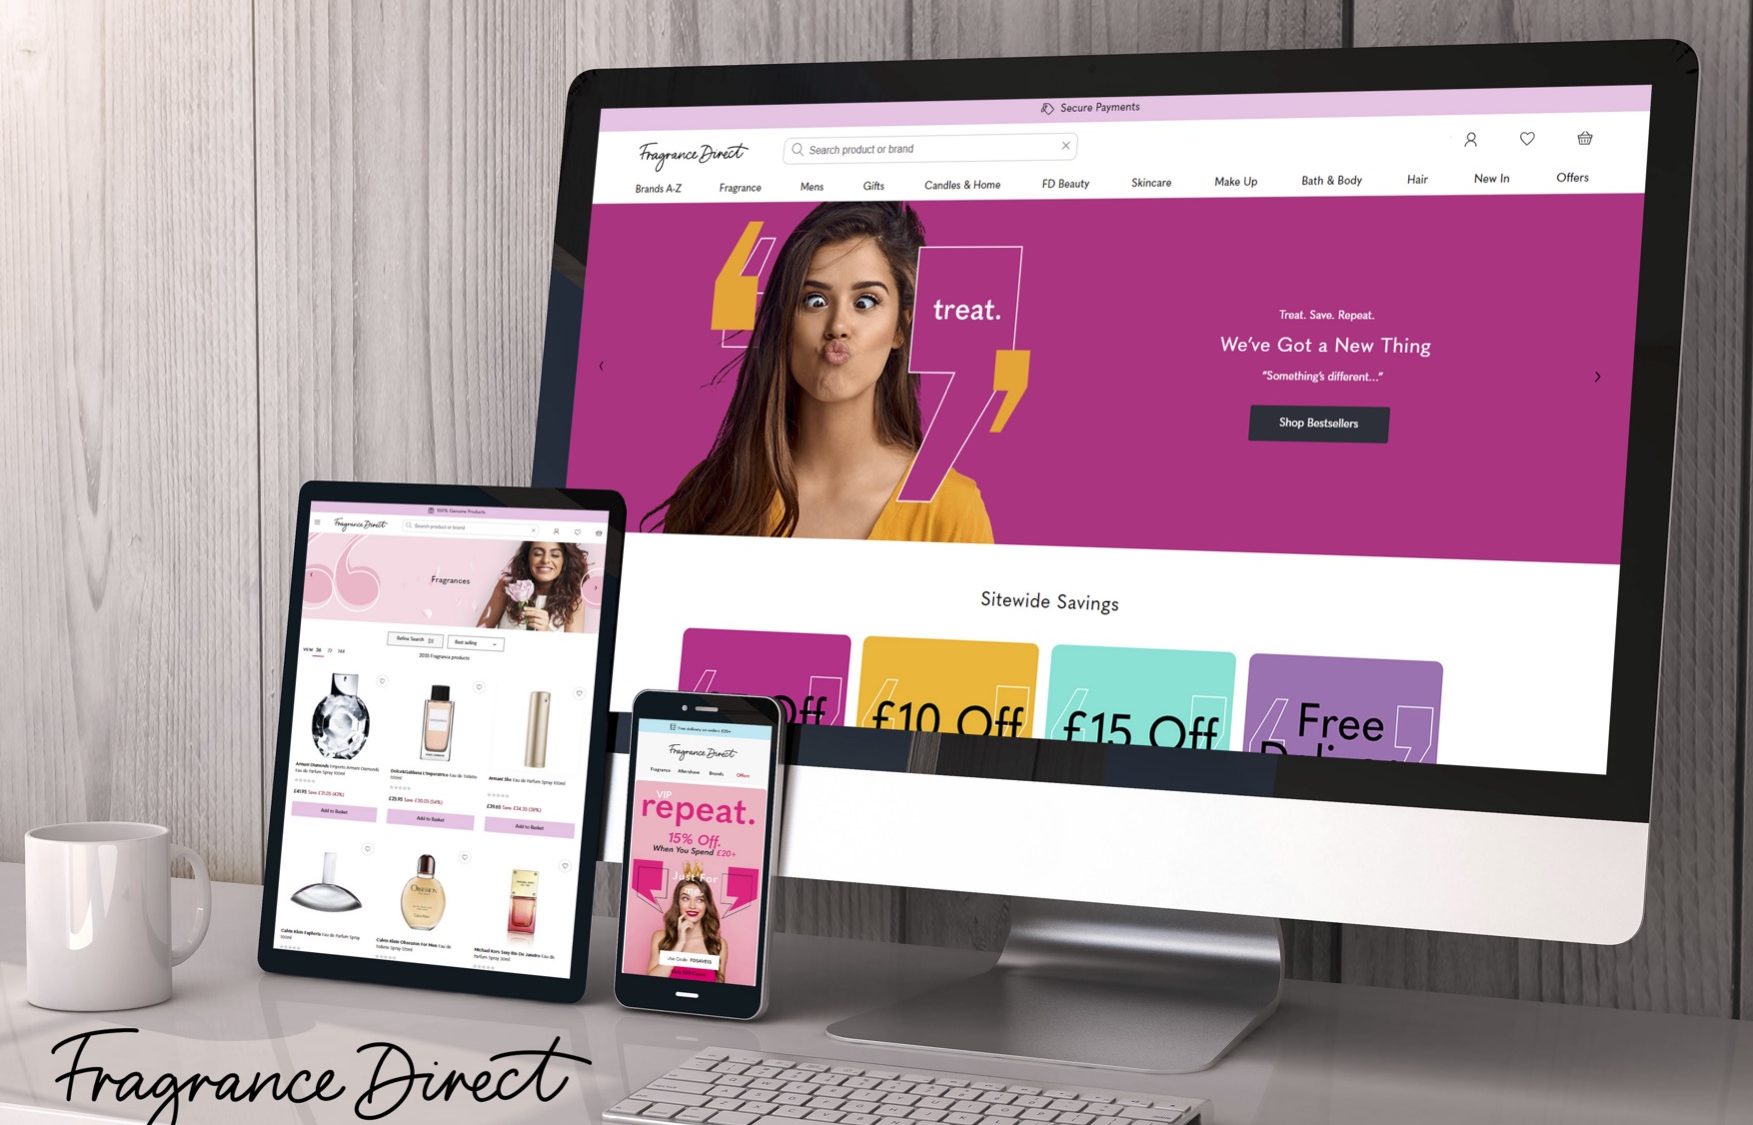 Fragrance Direct unveils a new branded eCommerce platform and brand refresh